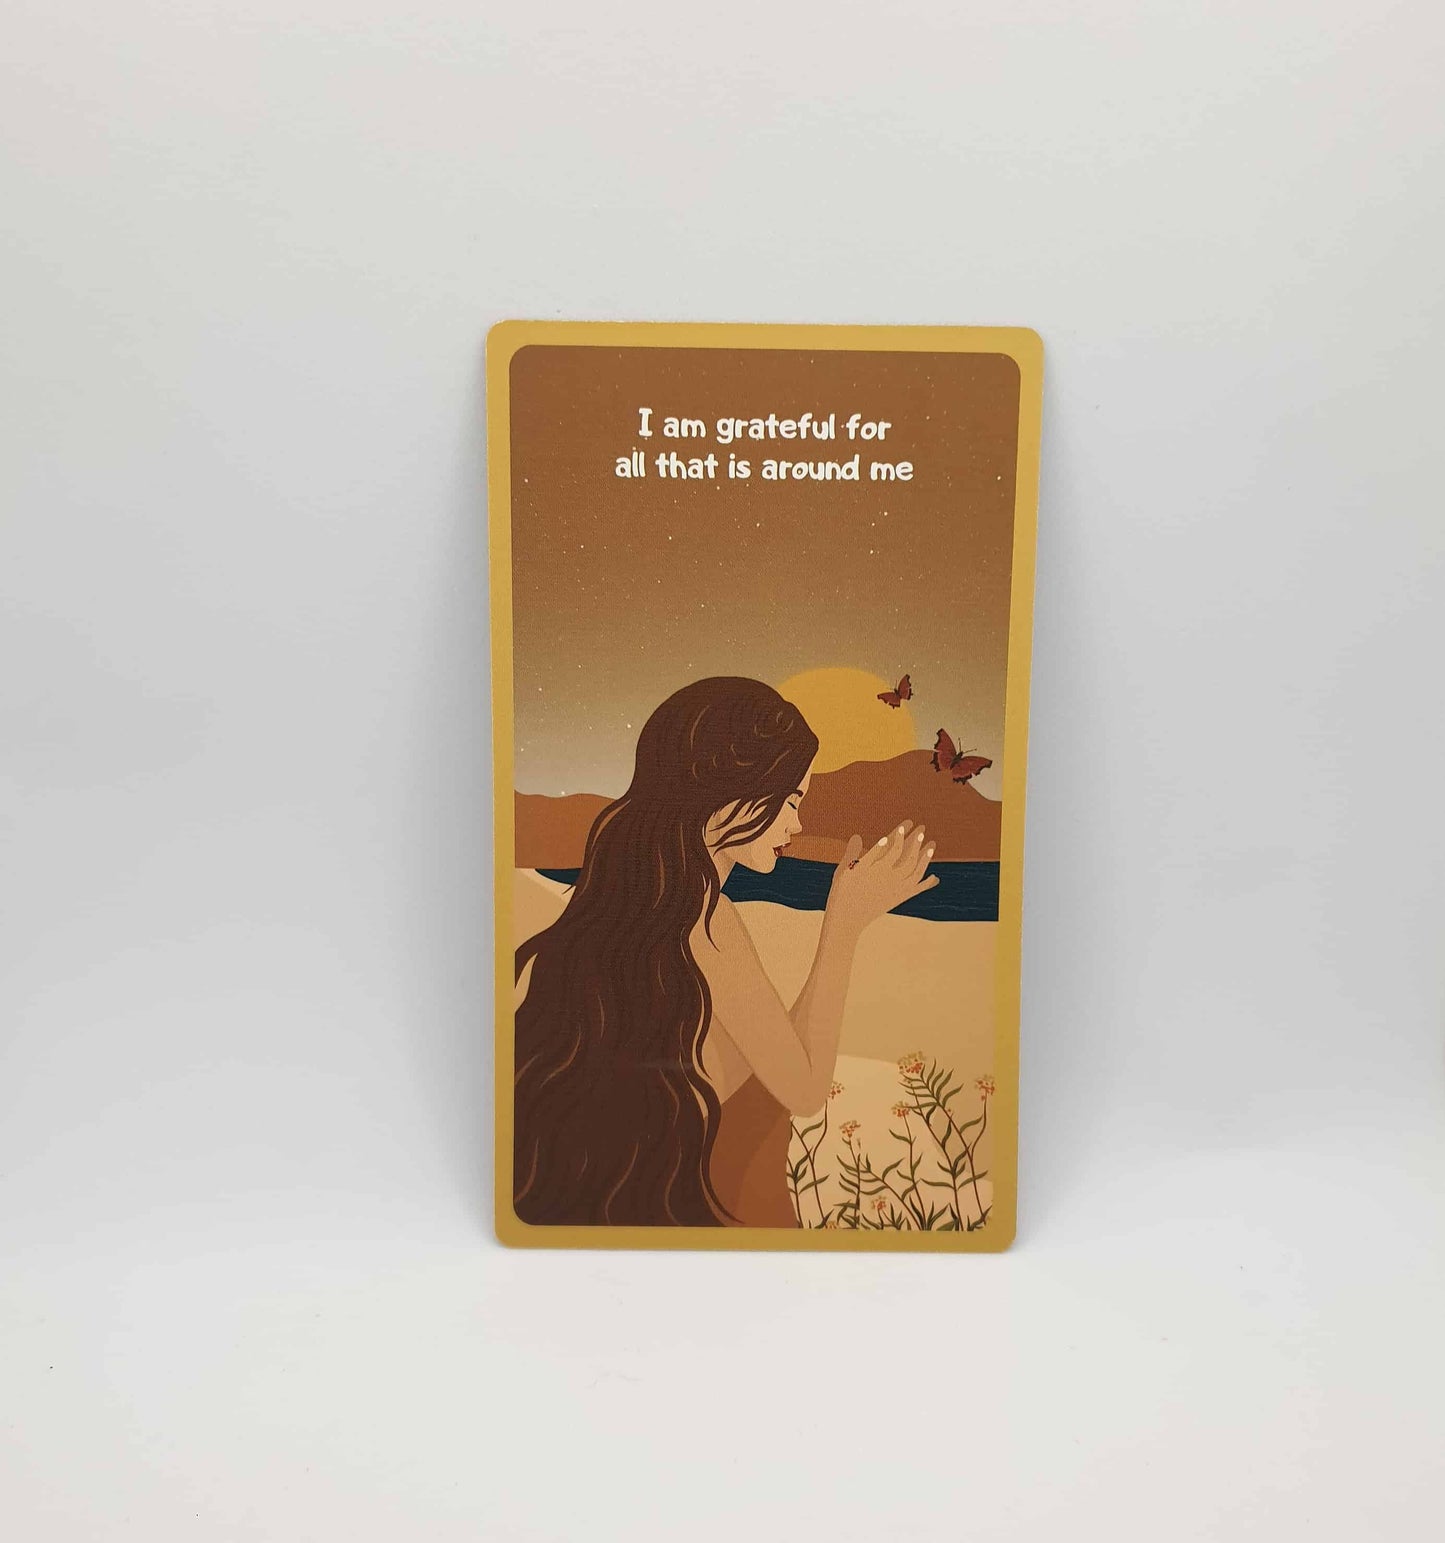 The Powerful Woman Affirmation Cards